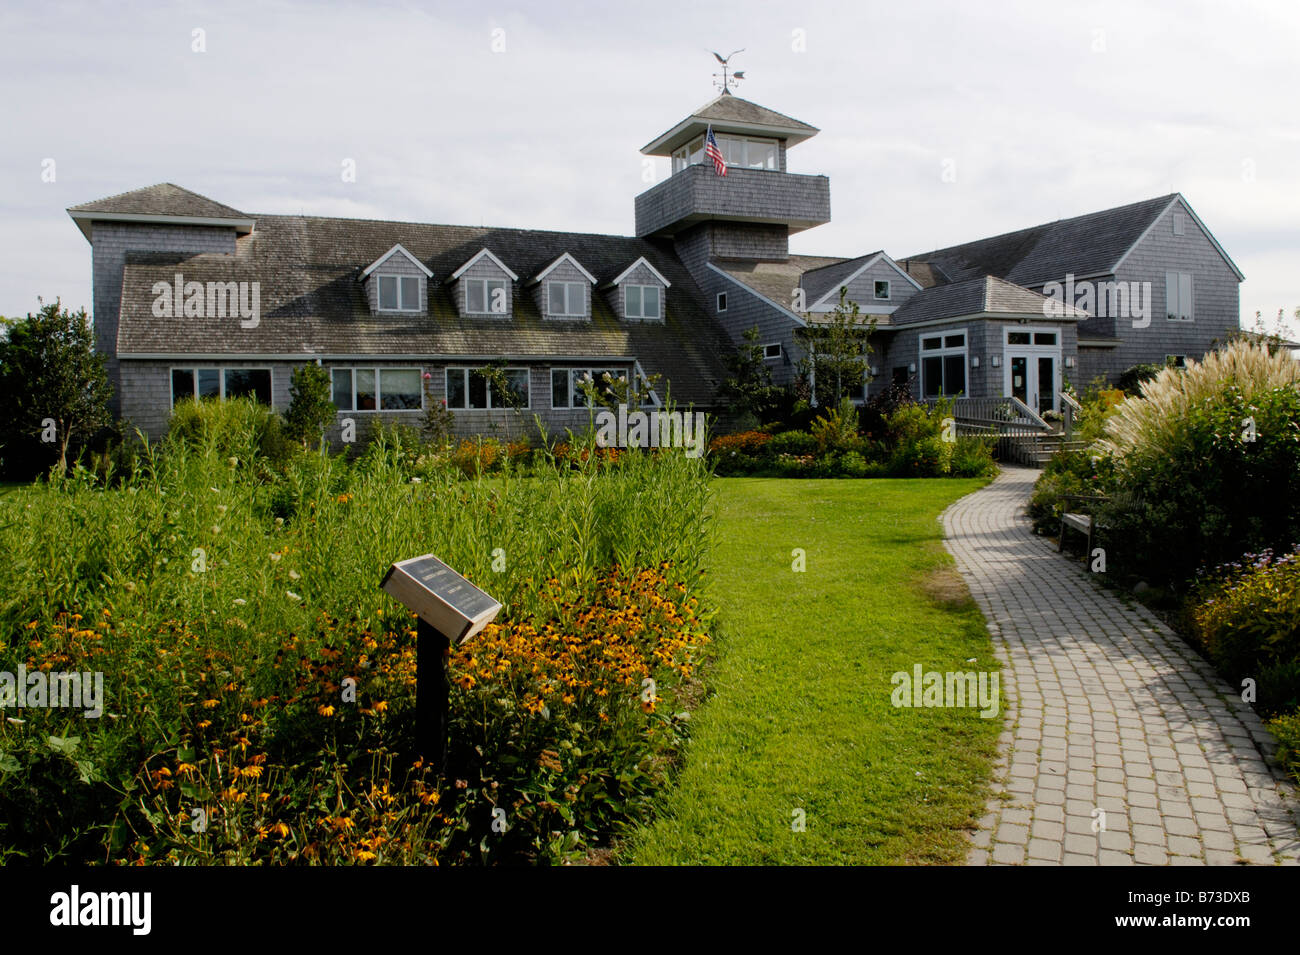 The Wetlands Institute, Stone Harbor, New Jersey Stock Photo